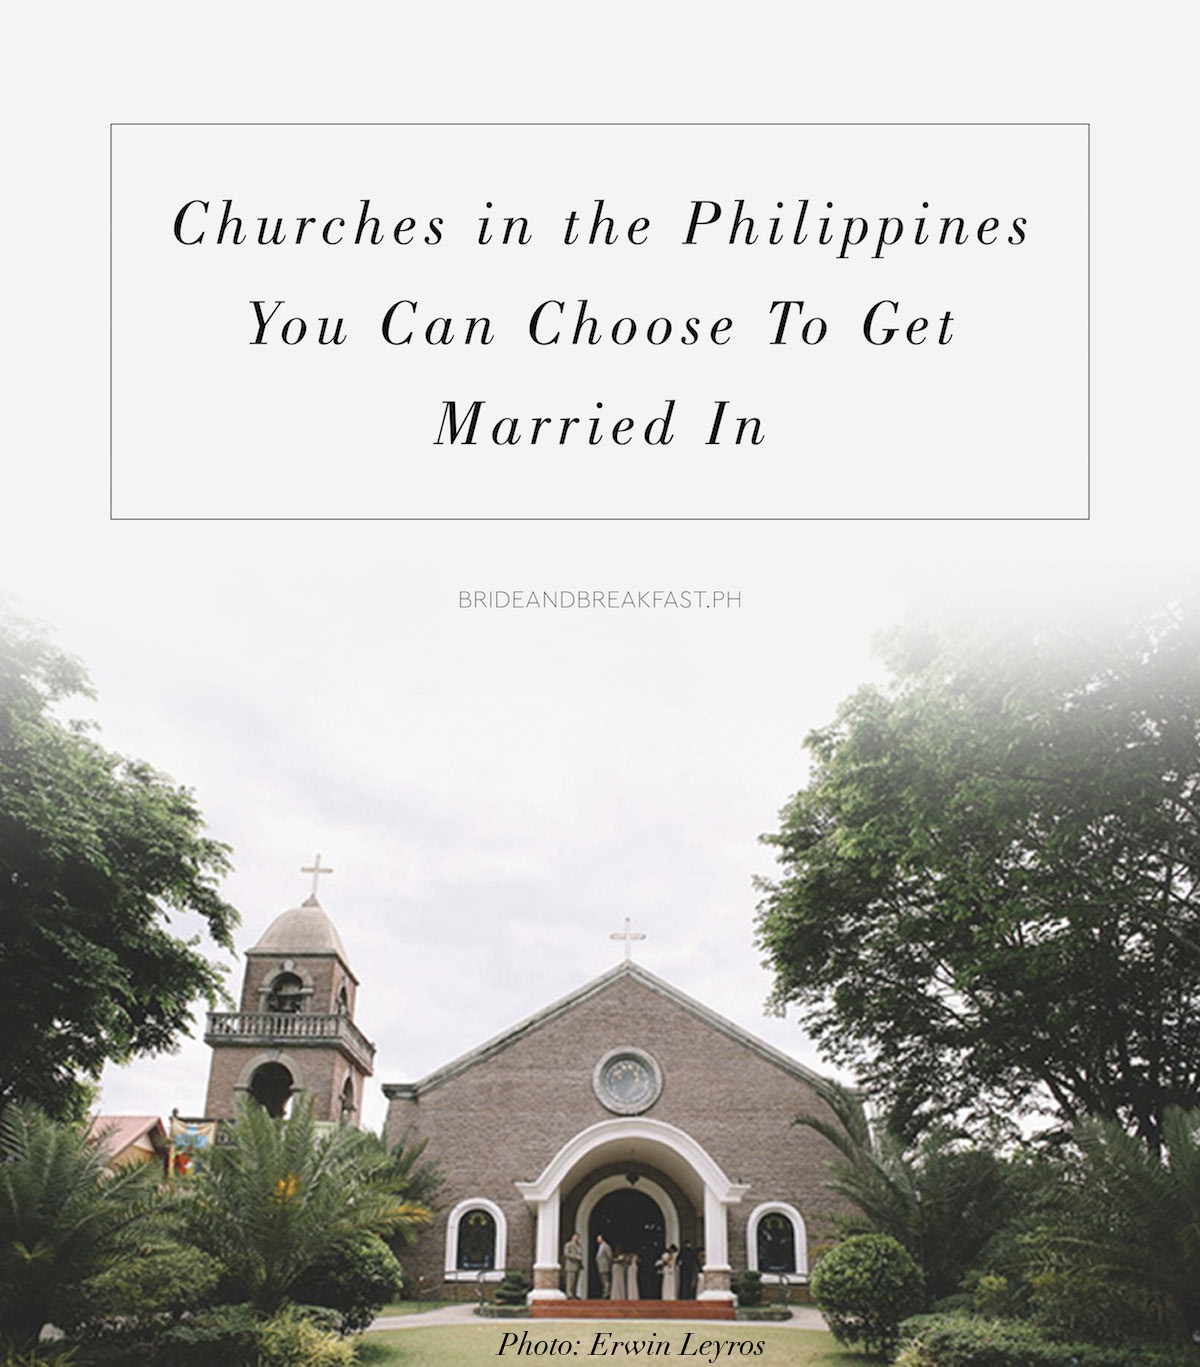 Churches in the Philippines You Can Choose To Get Married In Photo: Erwin Leyros